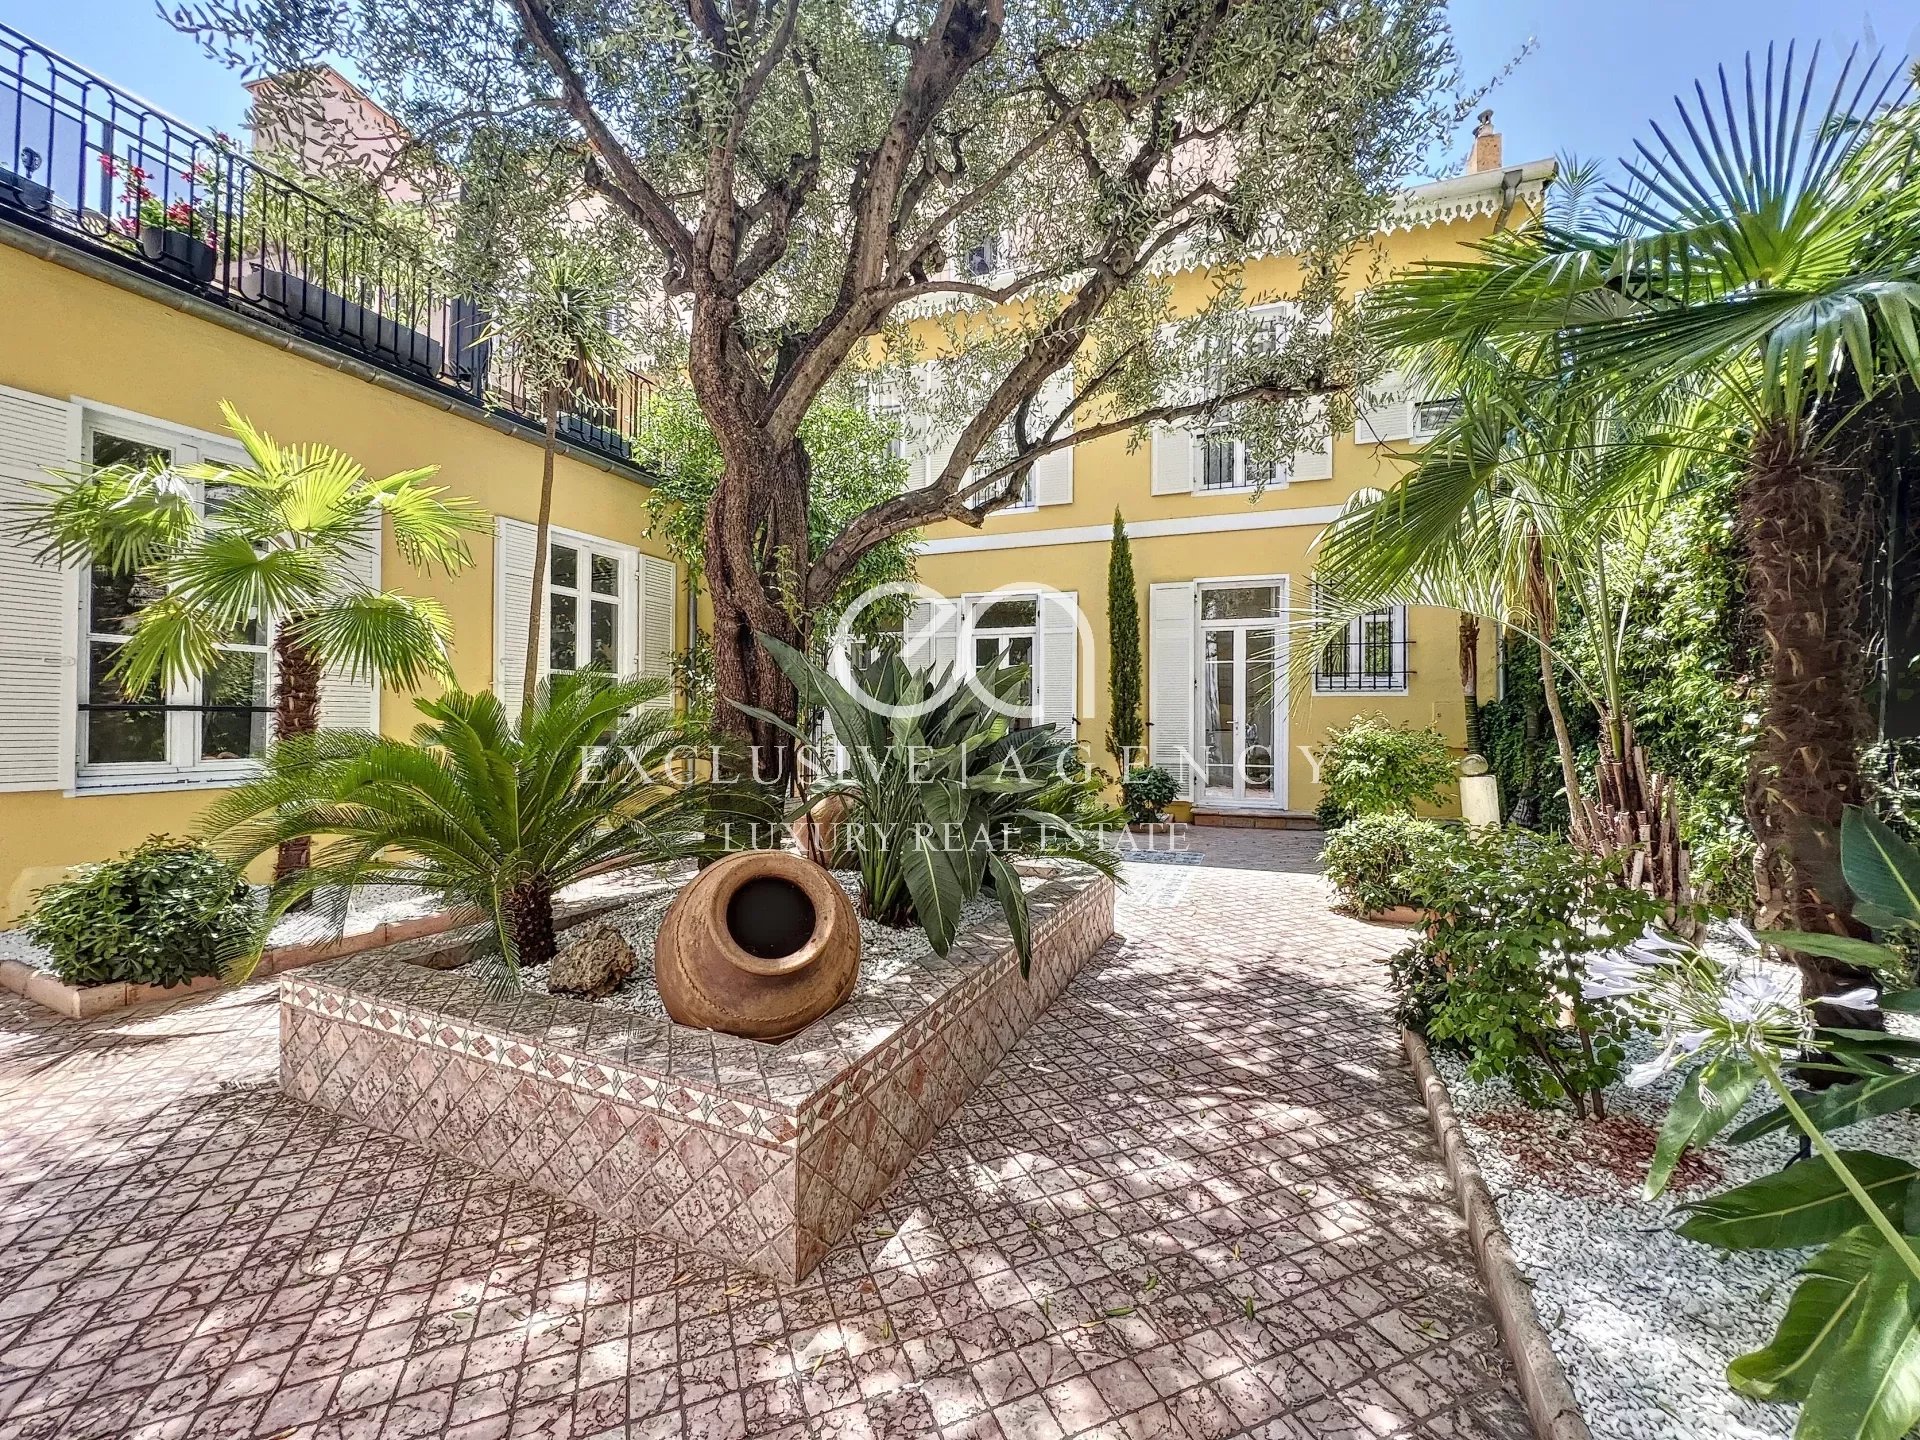 CANNES RUE D'ANTIBES TOWN HOUSE 132SQM WITH 110SQM COURTYARD AND GARAGE